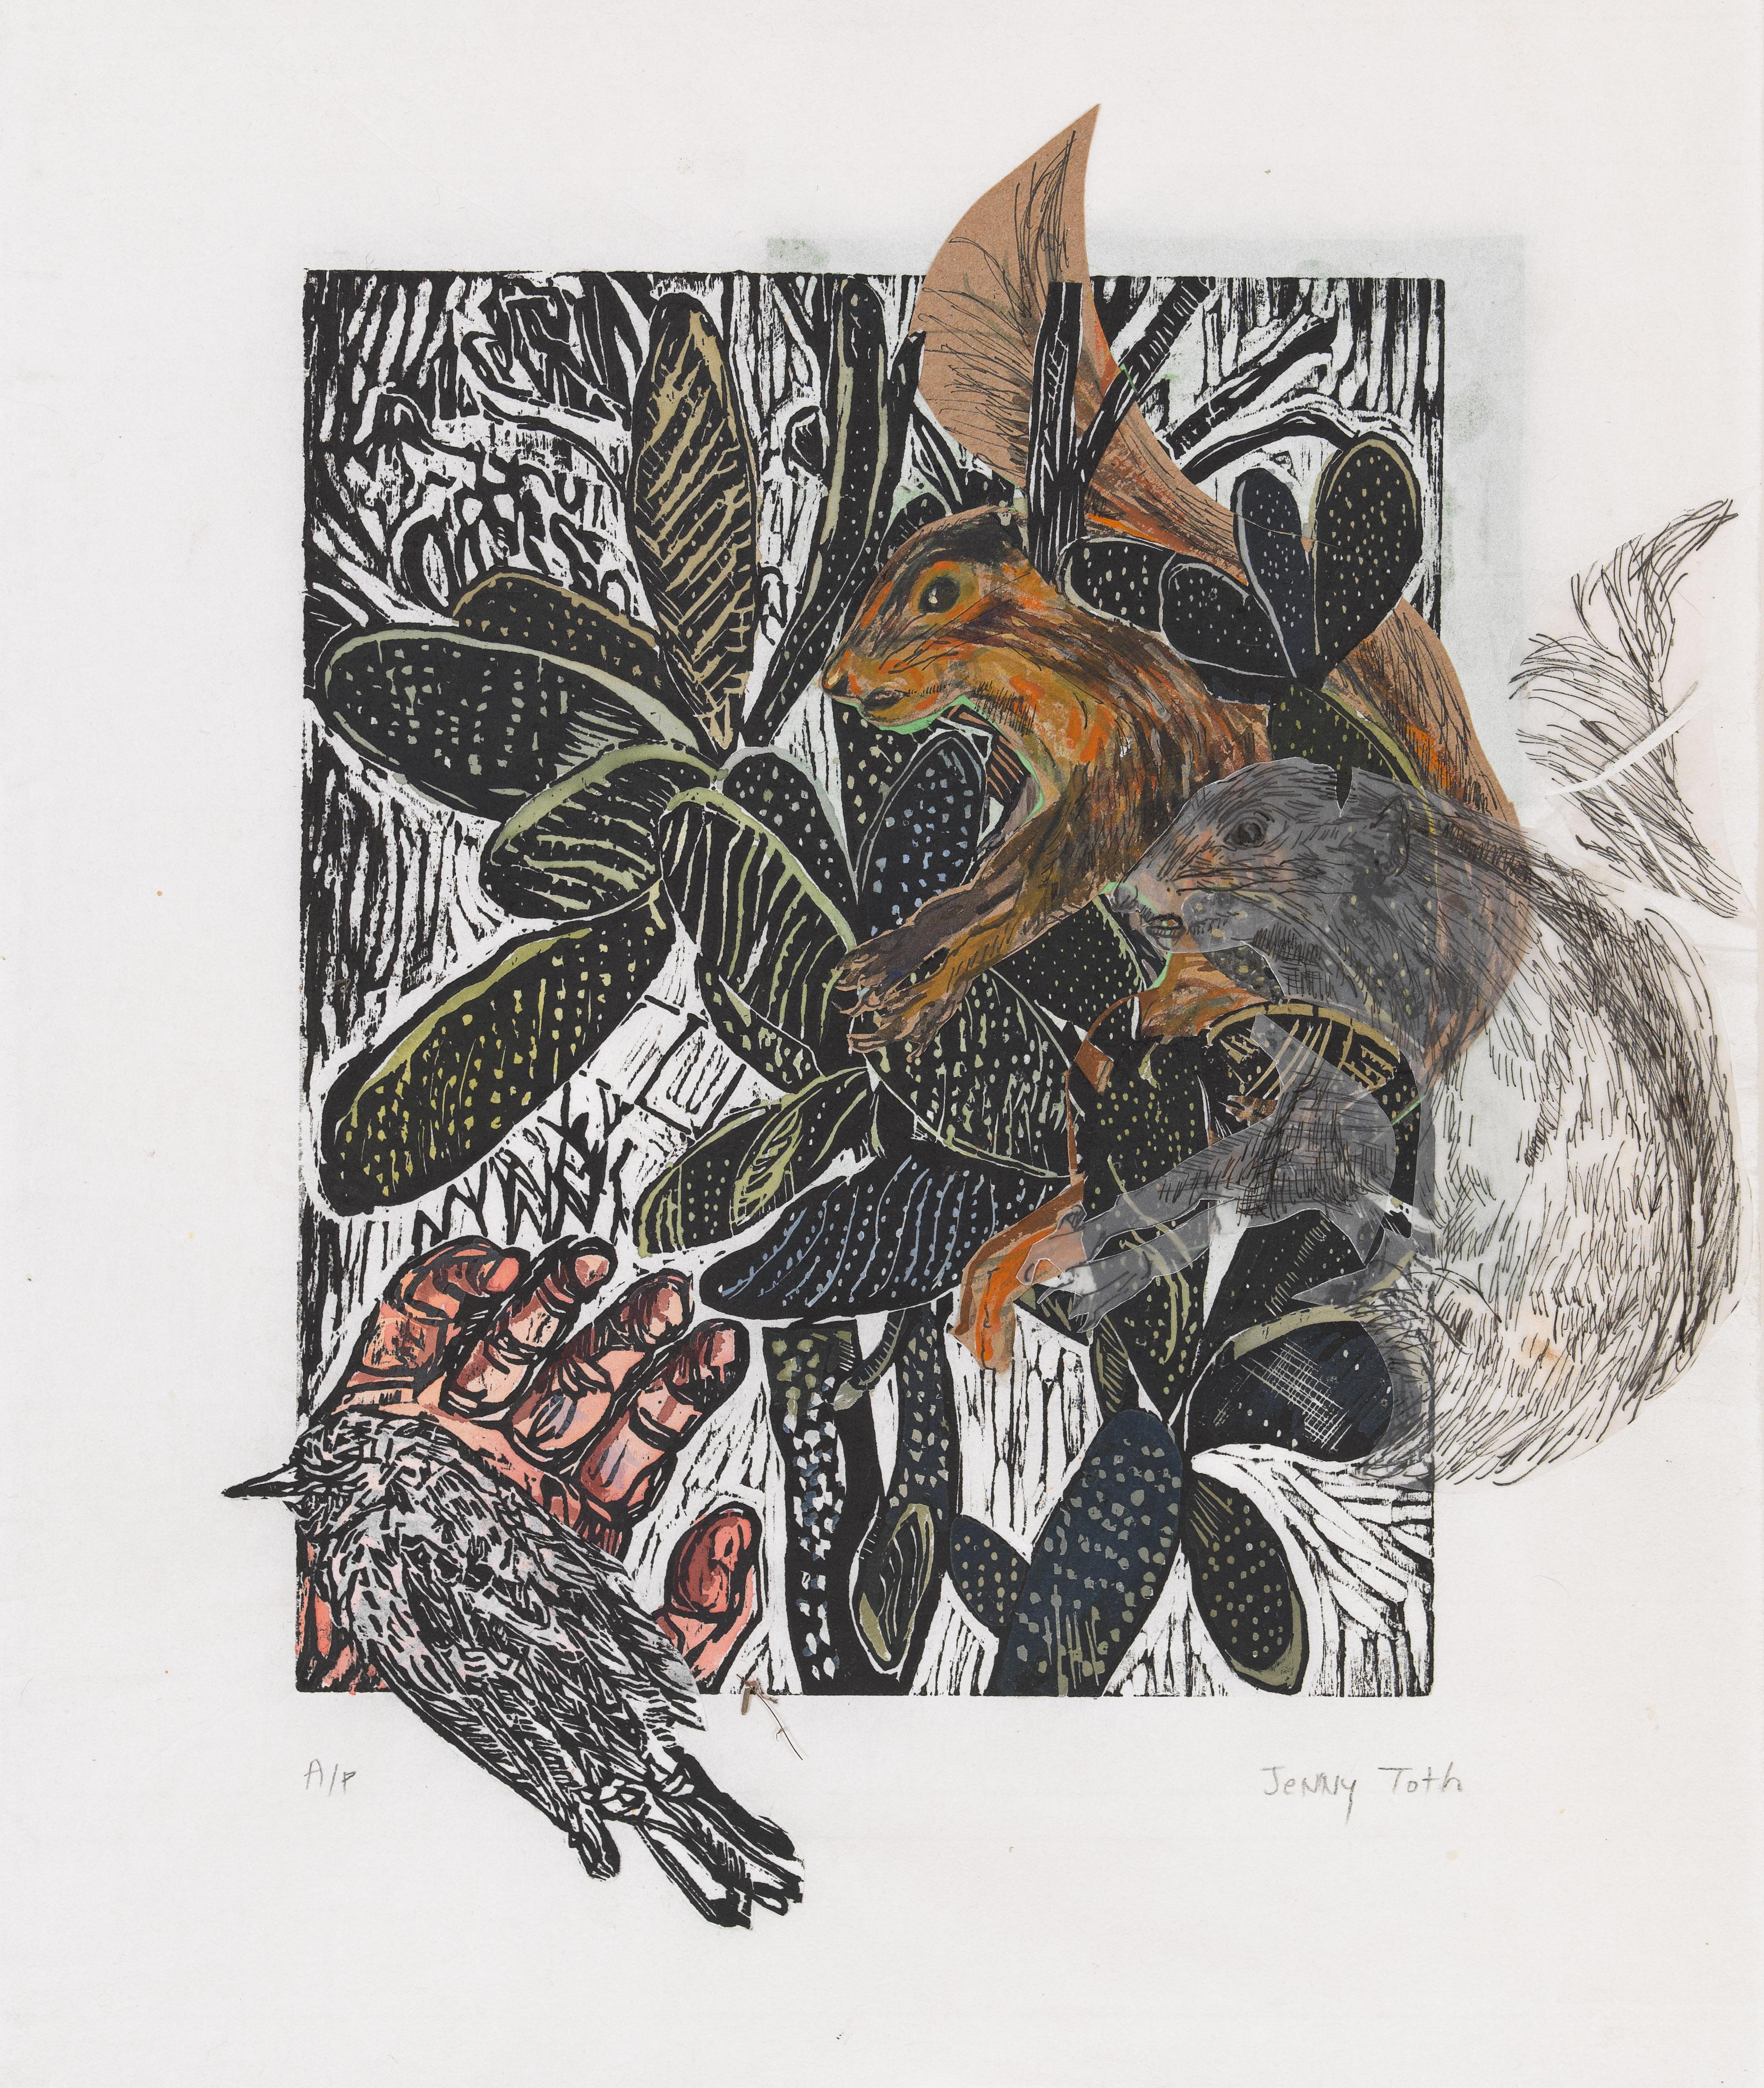 A Bird in the Hand is Worth Two Squirrels in a Cactus, animals - Mixed Media Art by Jenny Toth